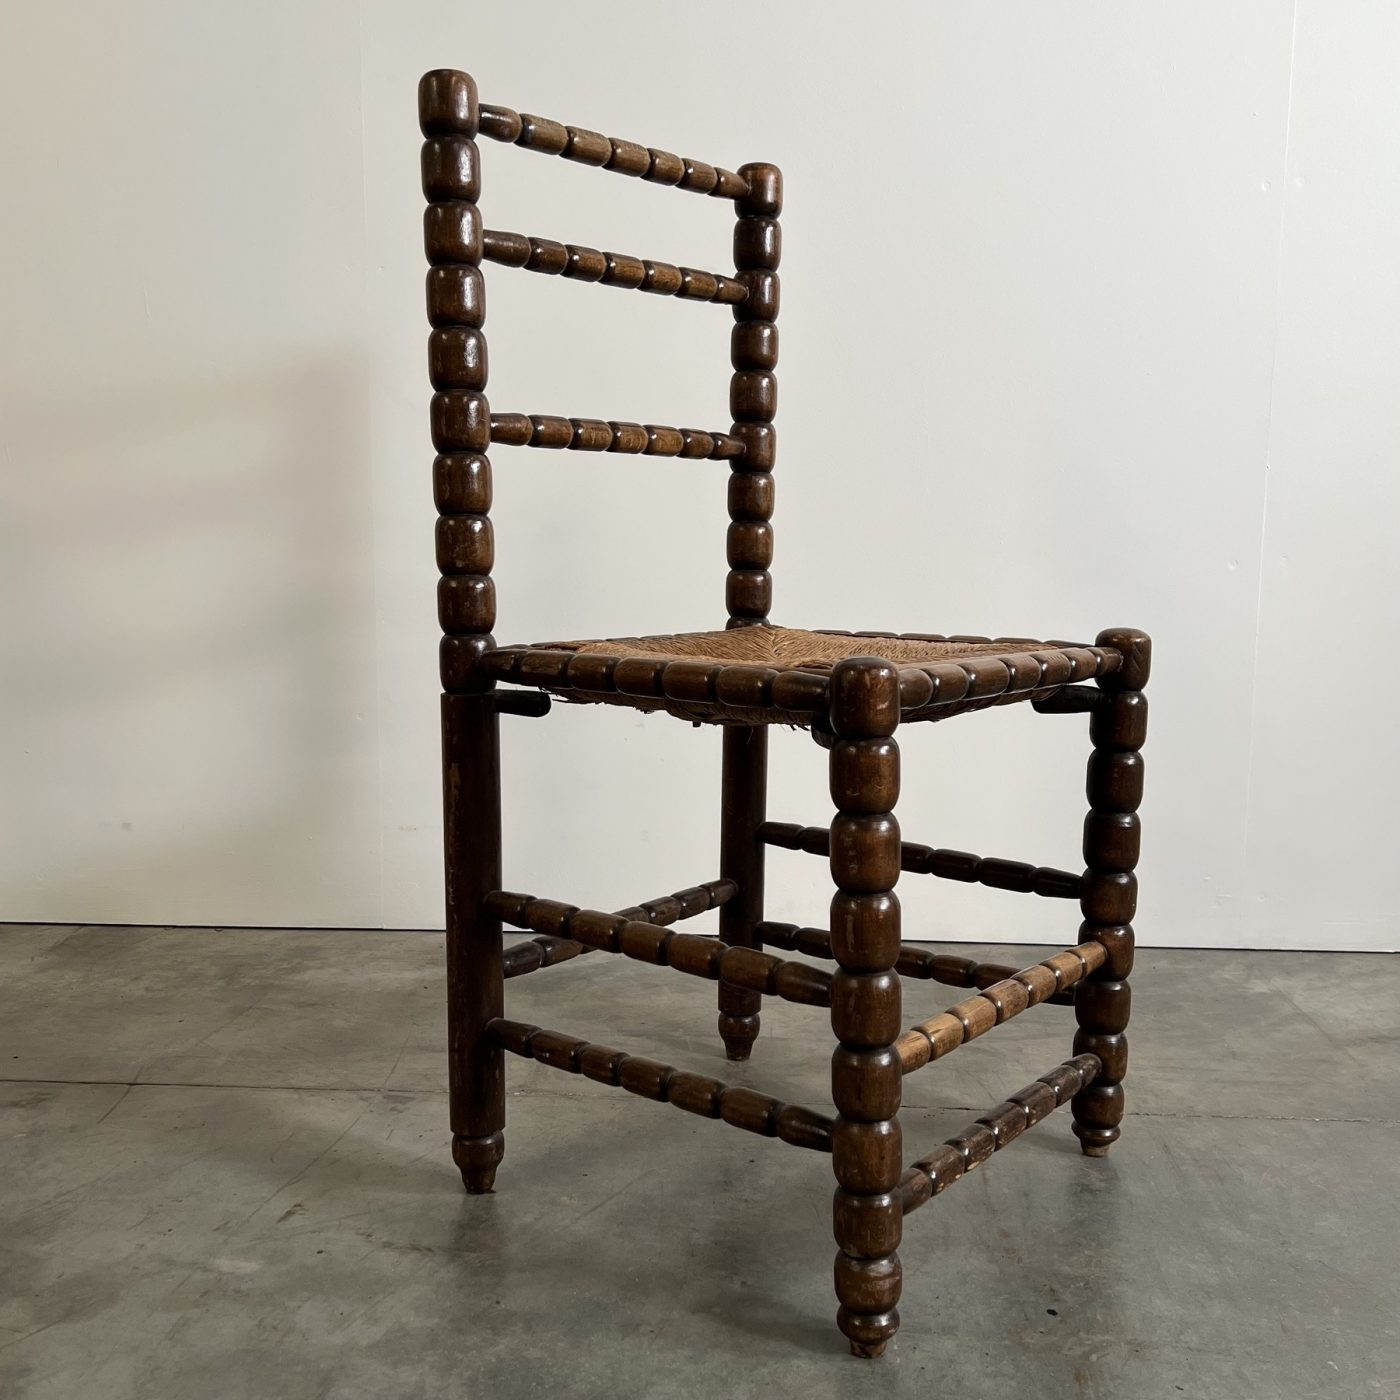 objet-wooden-chairs0000